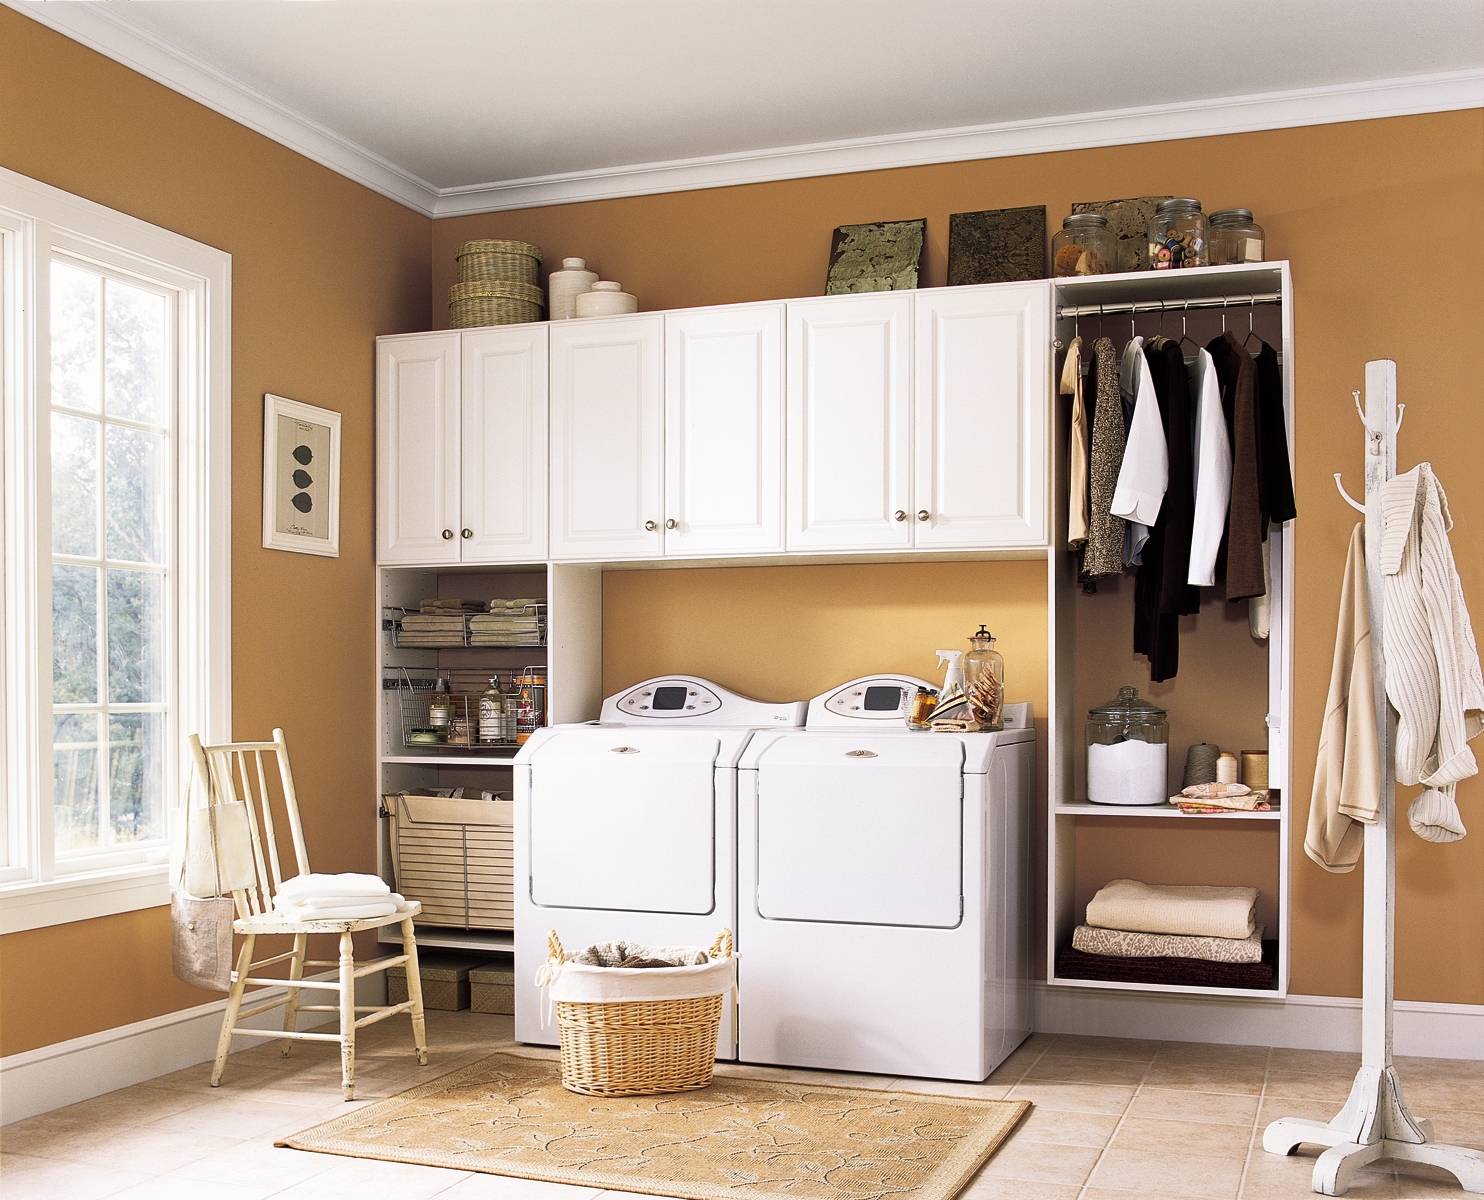 Laundry Room Wall Cabinet Ideas seattle 2022